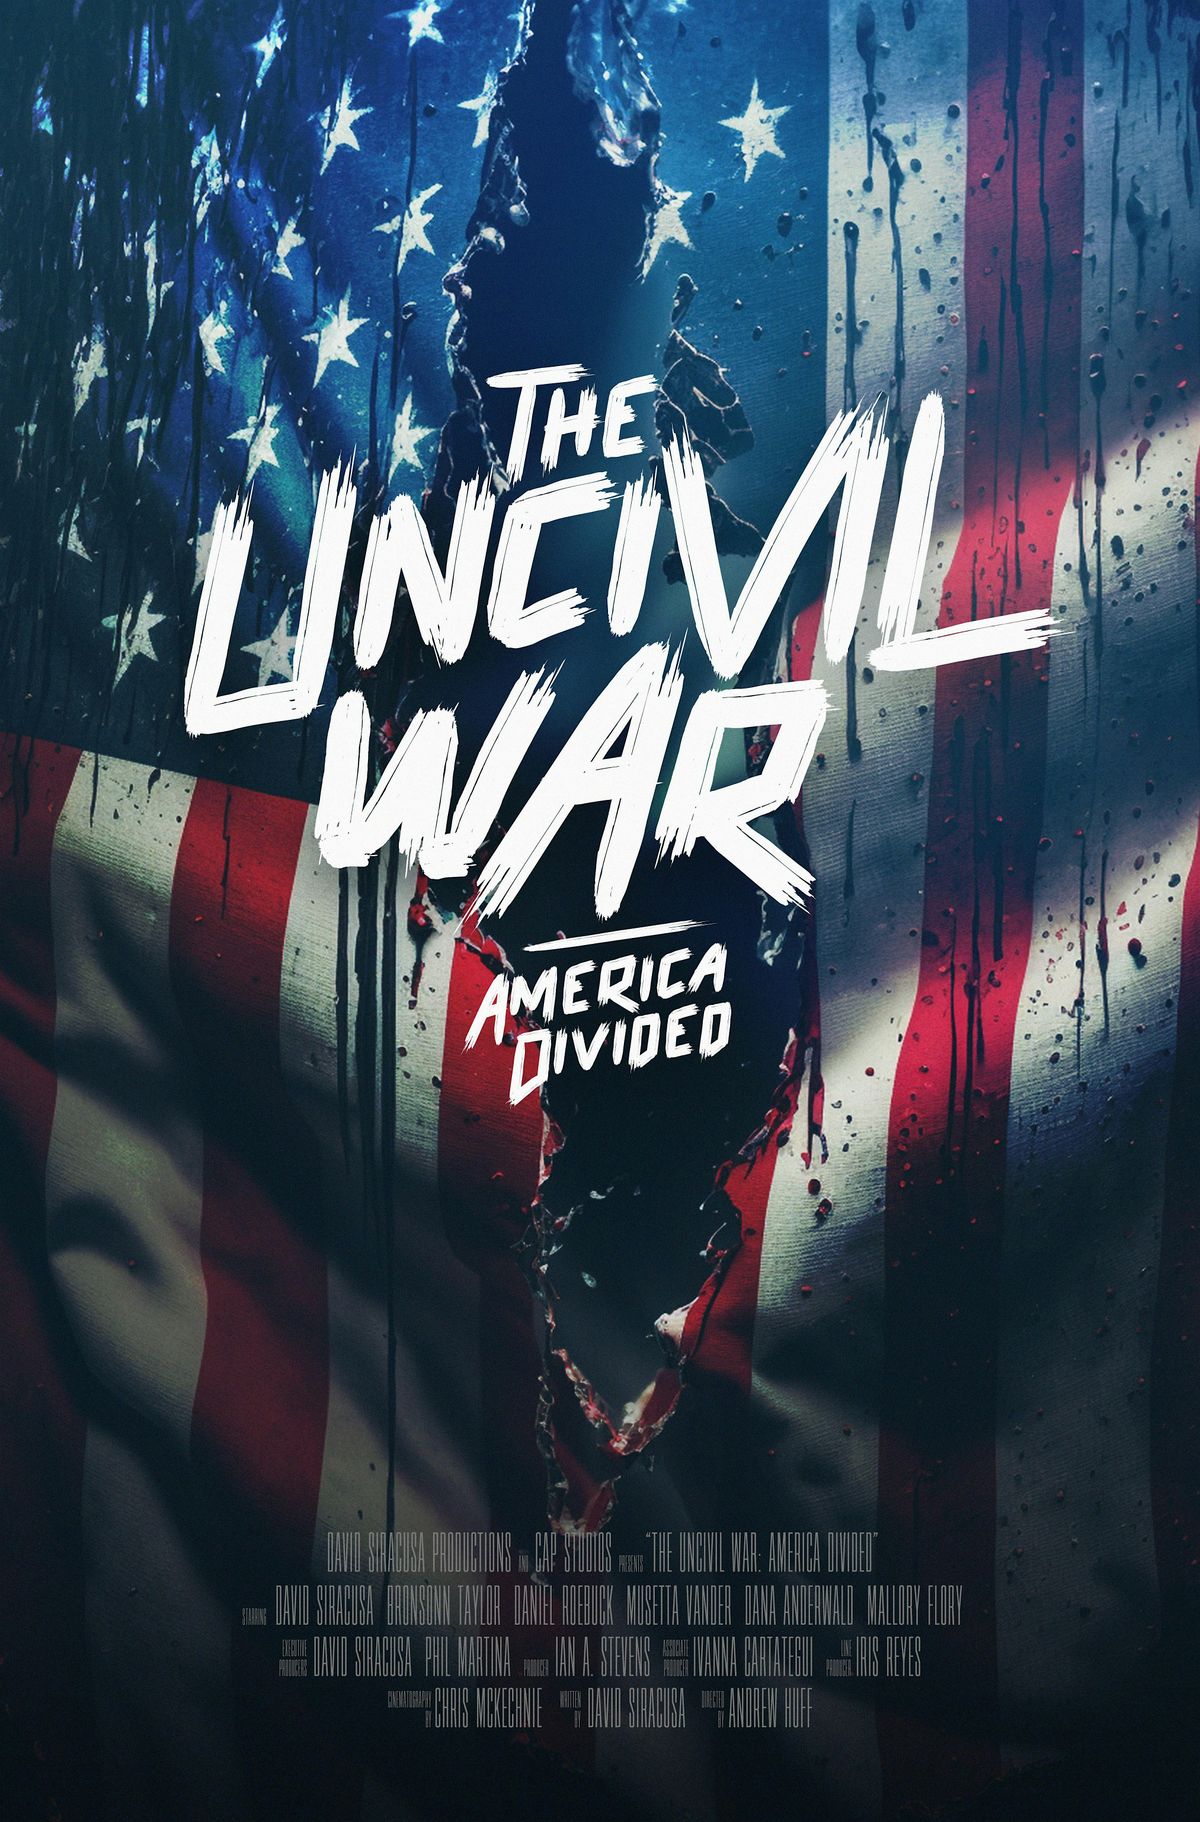 The Uncivil War - America Divided Premiere Lux in Plant City 7 PM